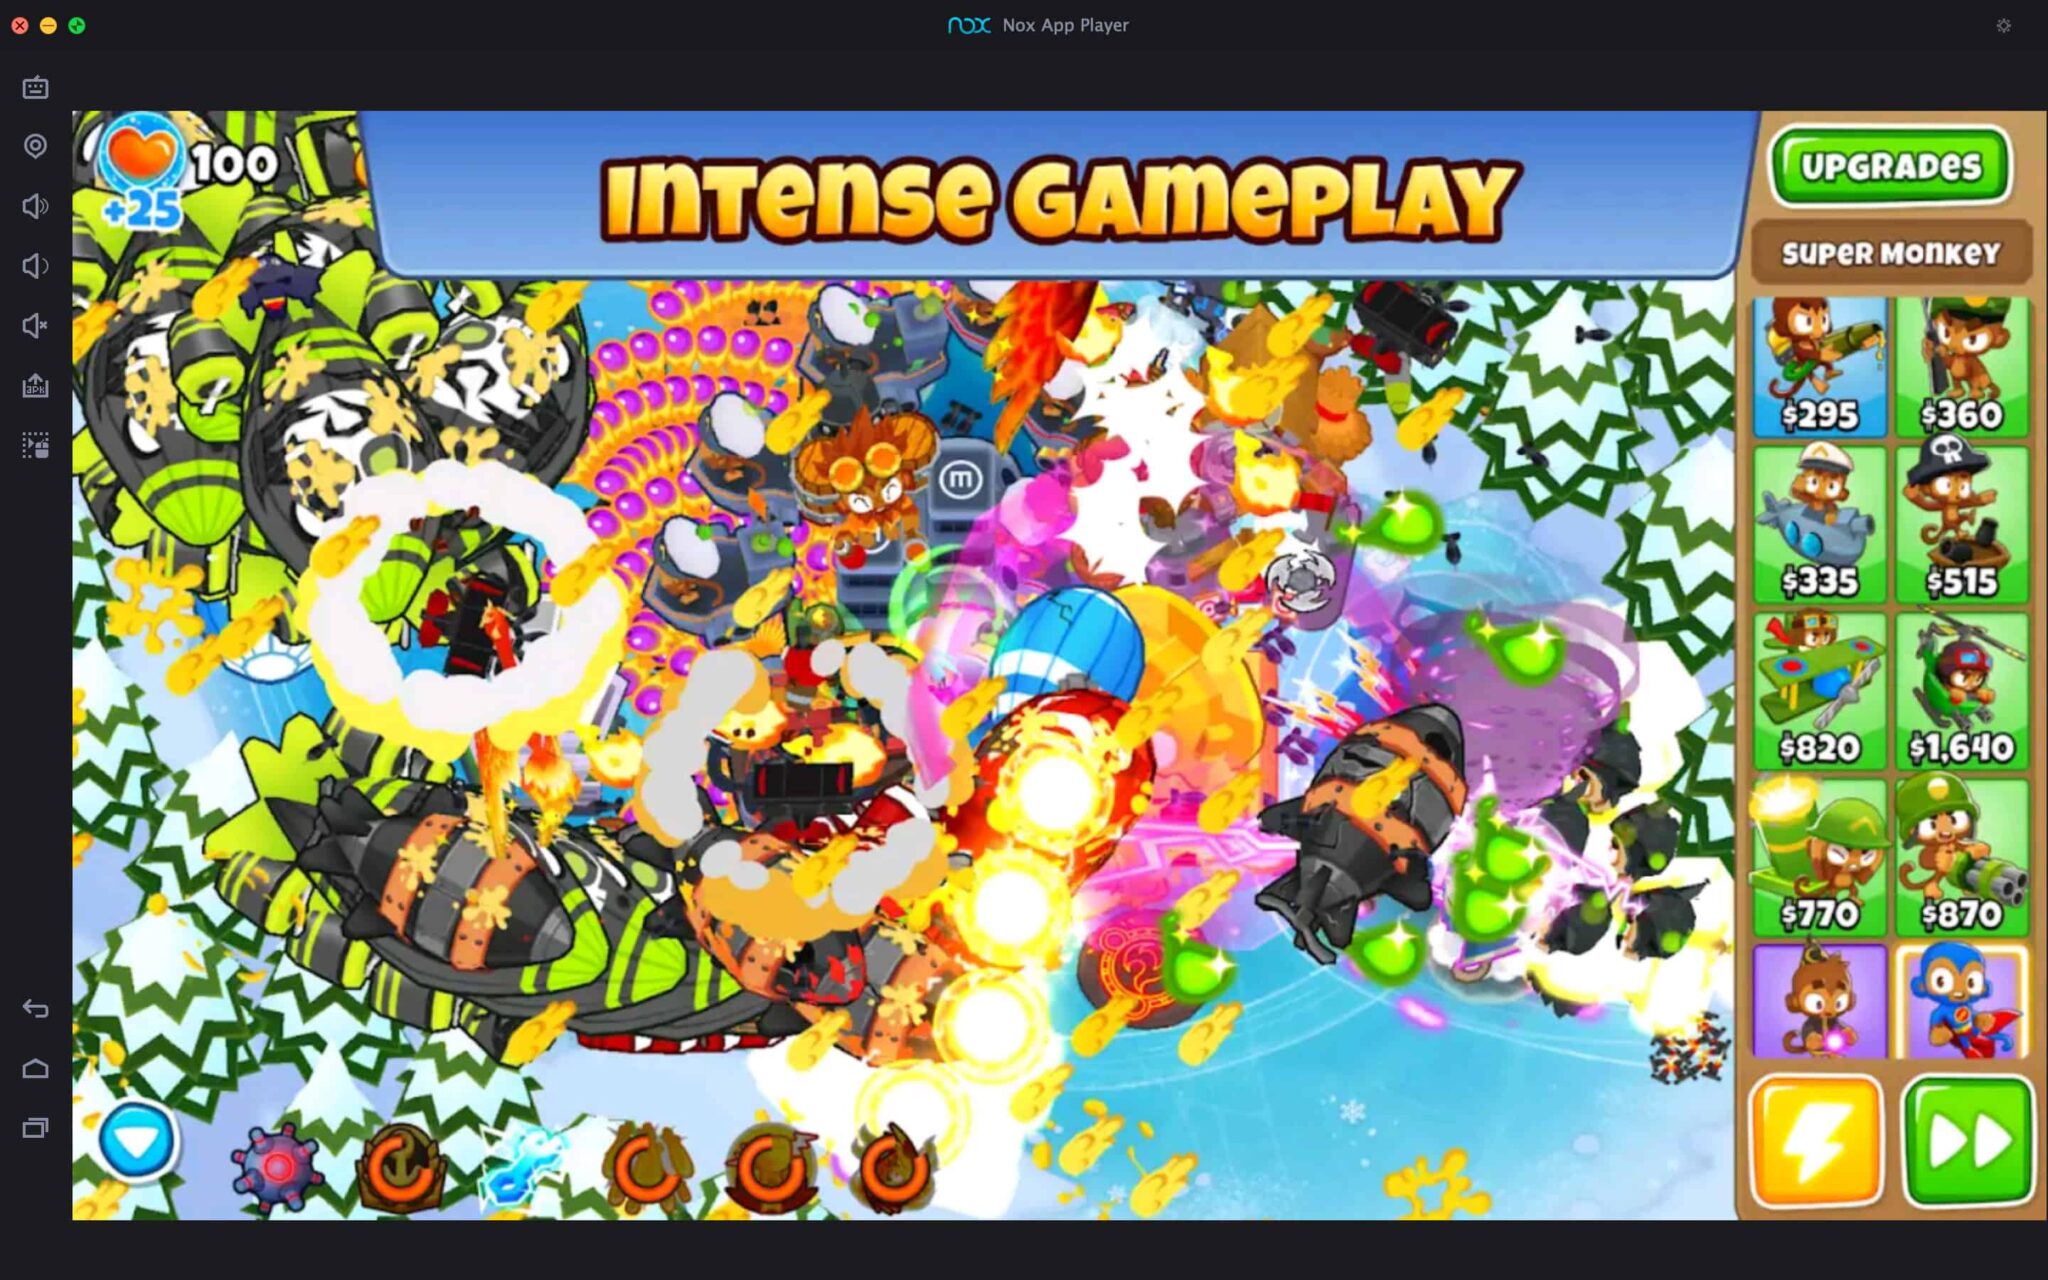 Bloons TD 6 For PC installation